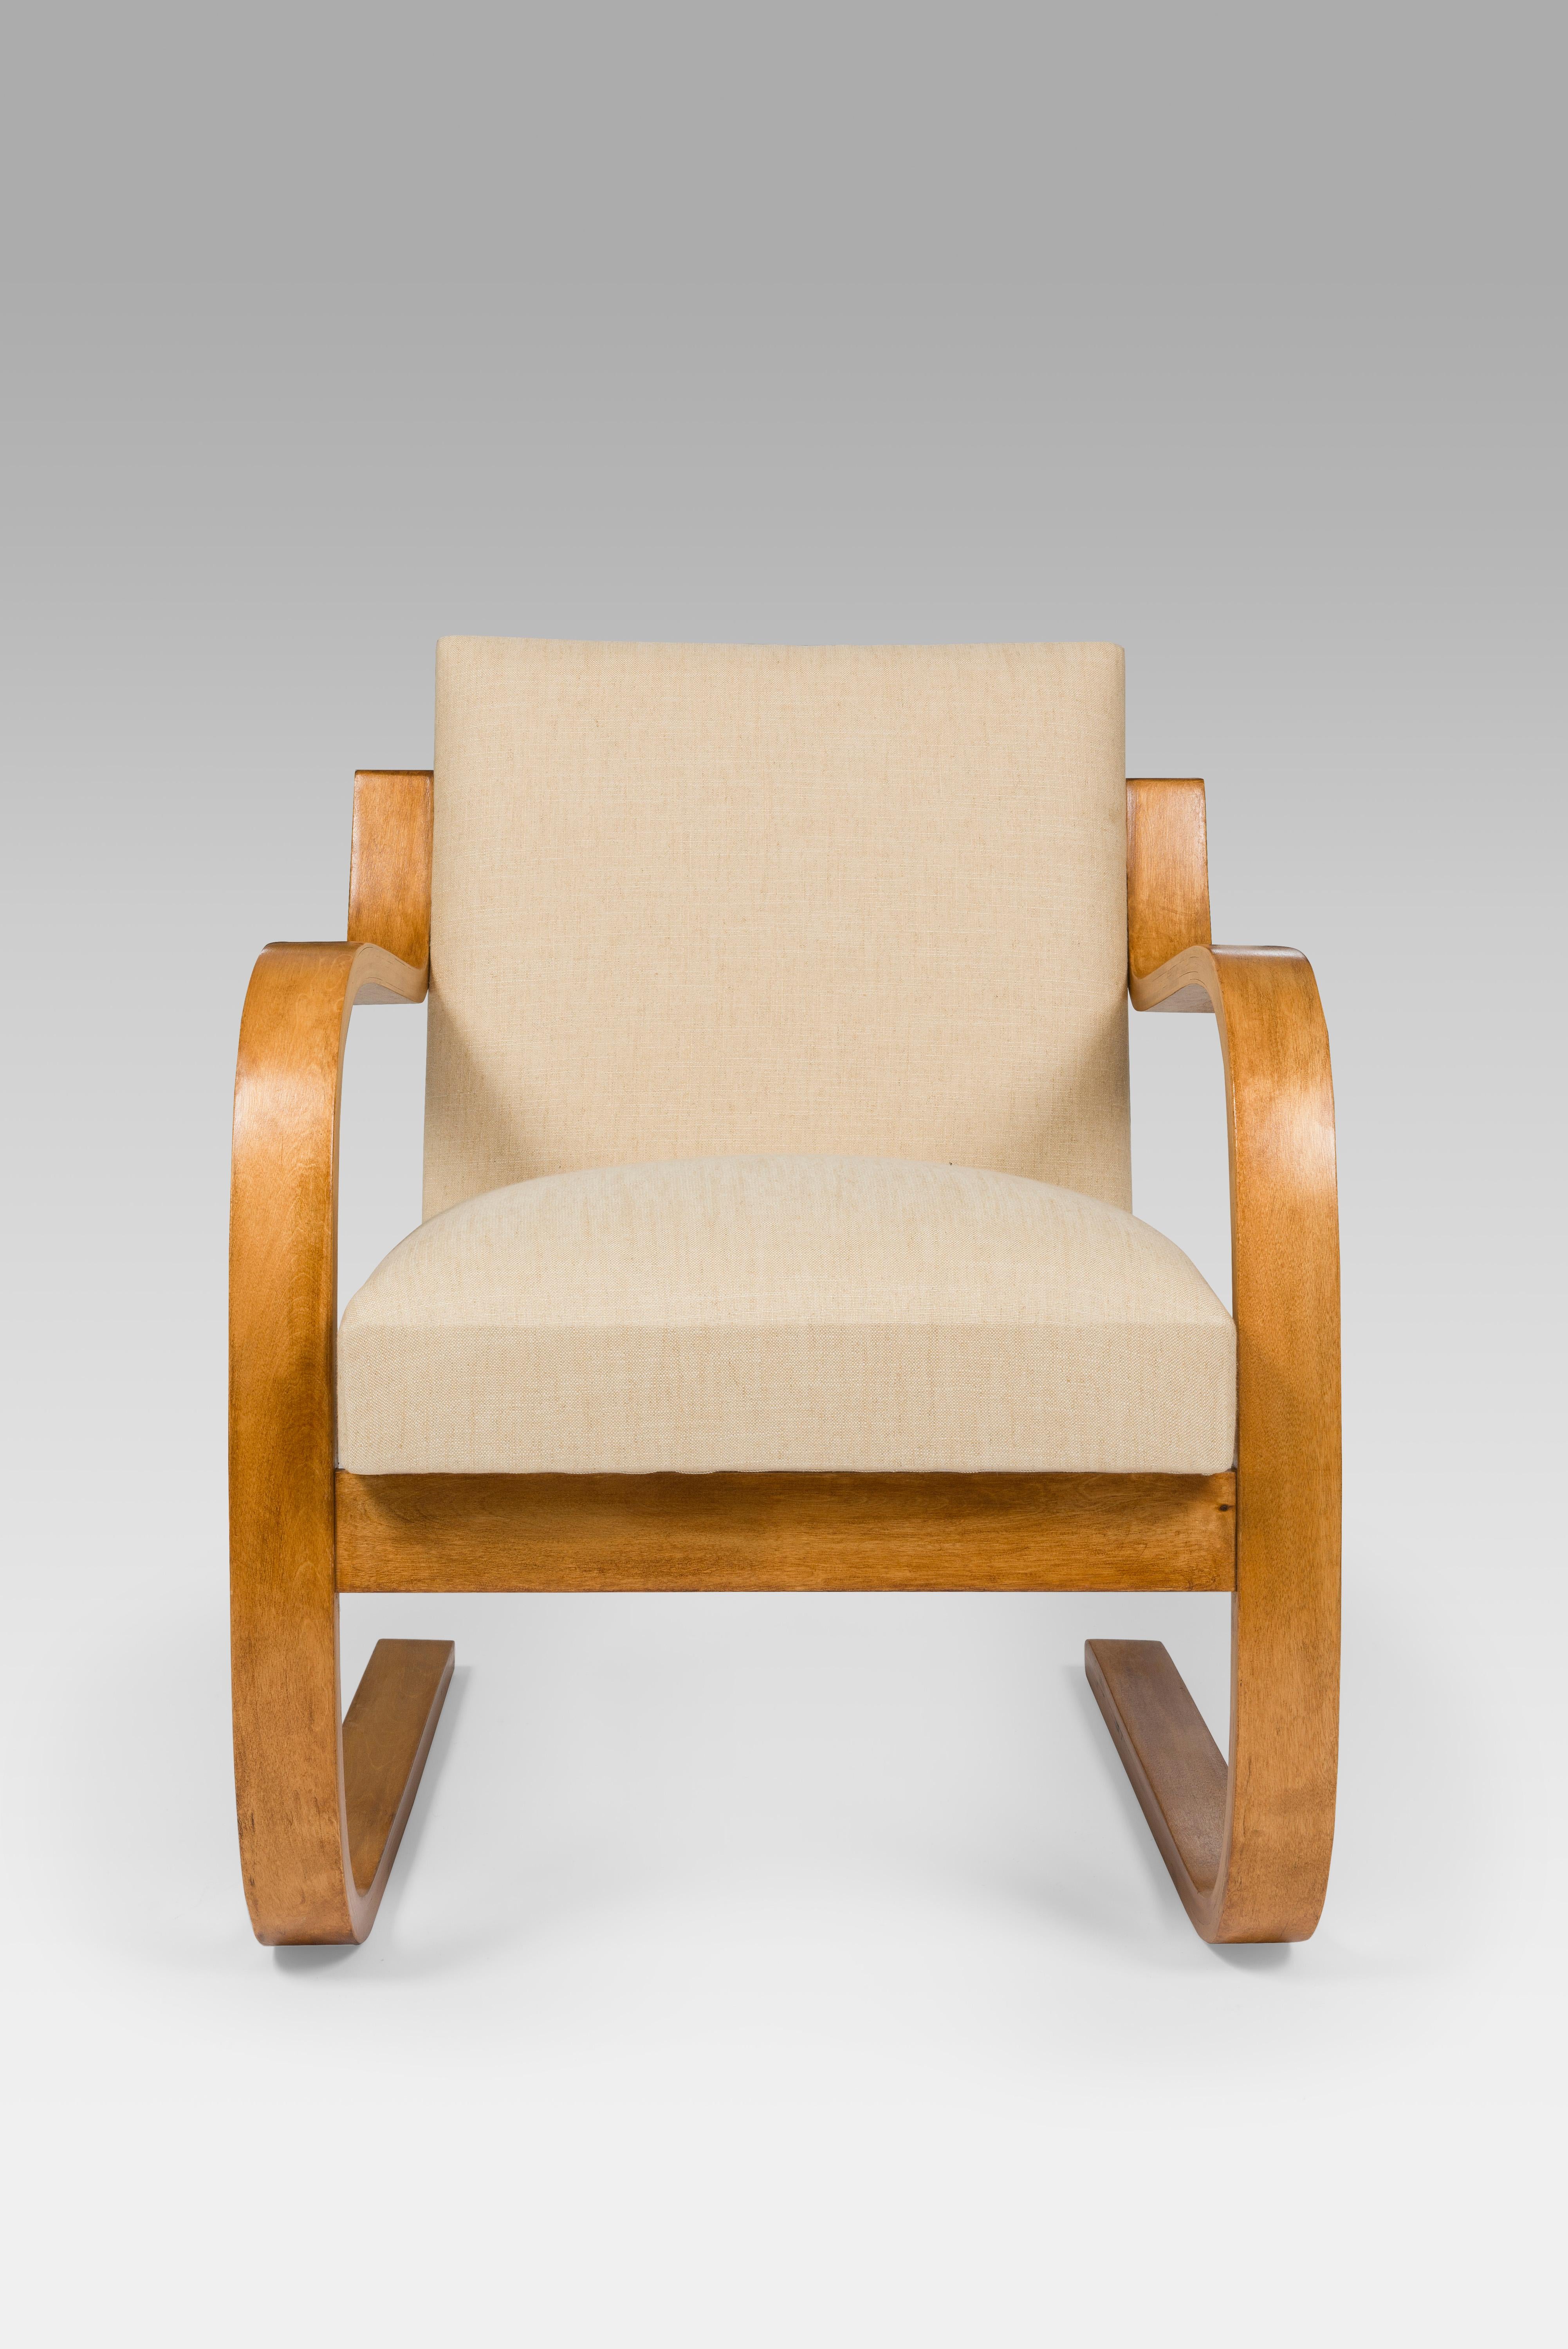 Original 1930's Alvar Aalto Model 402 lounge chair with reupholstered off-white cream fabric. 

One of Aalto's notable creations is the 